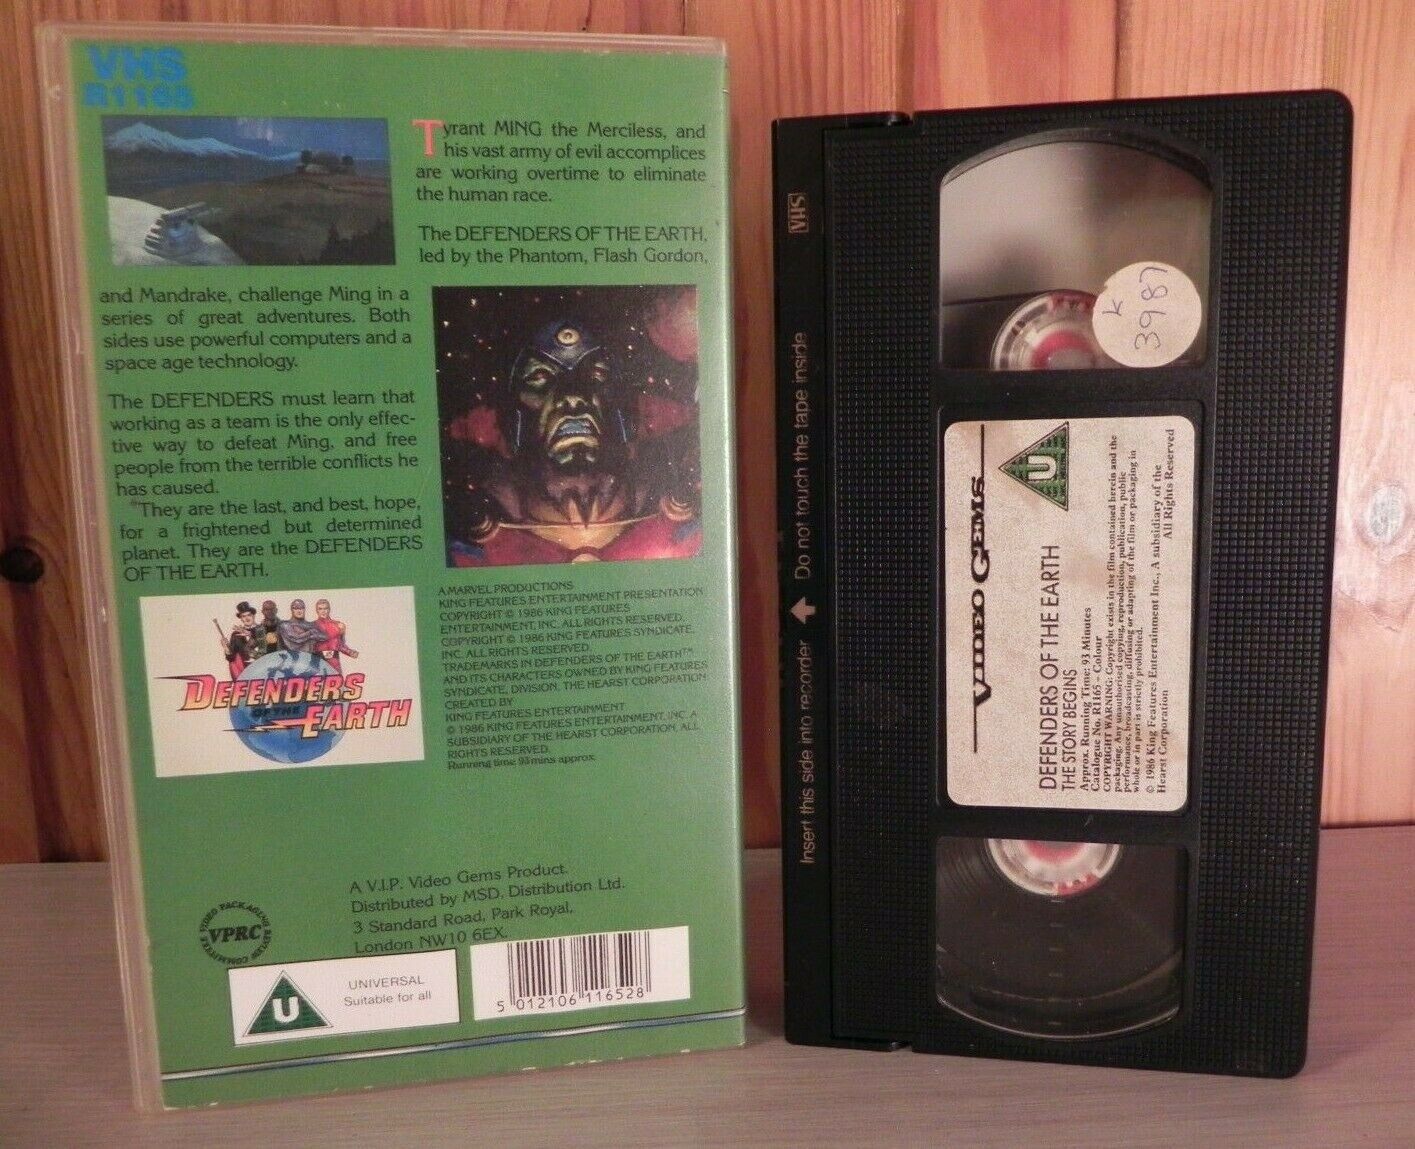 Defenders Of The Earth: Only They Can Sace Us - Action Animation - Kids - VHS-